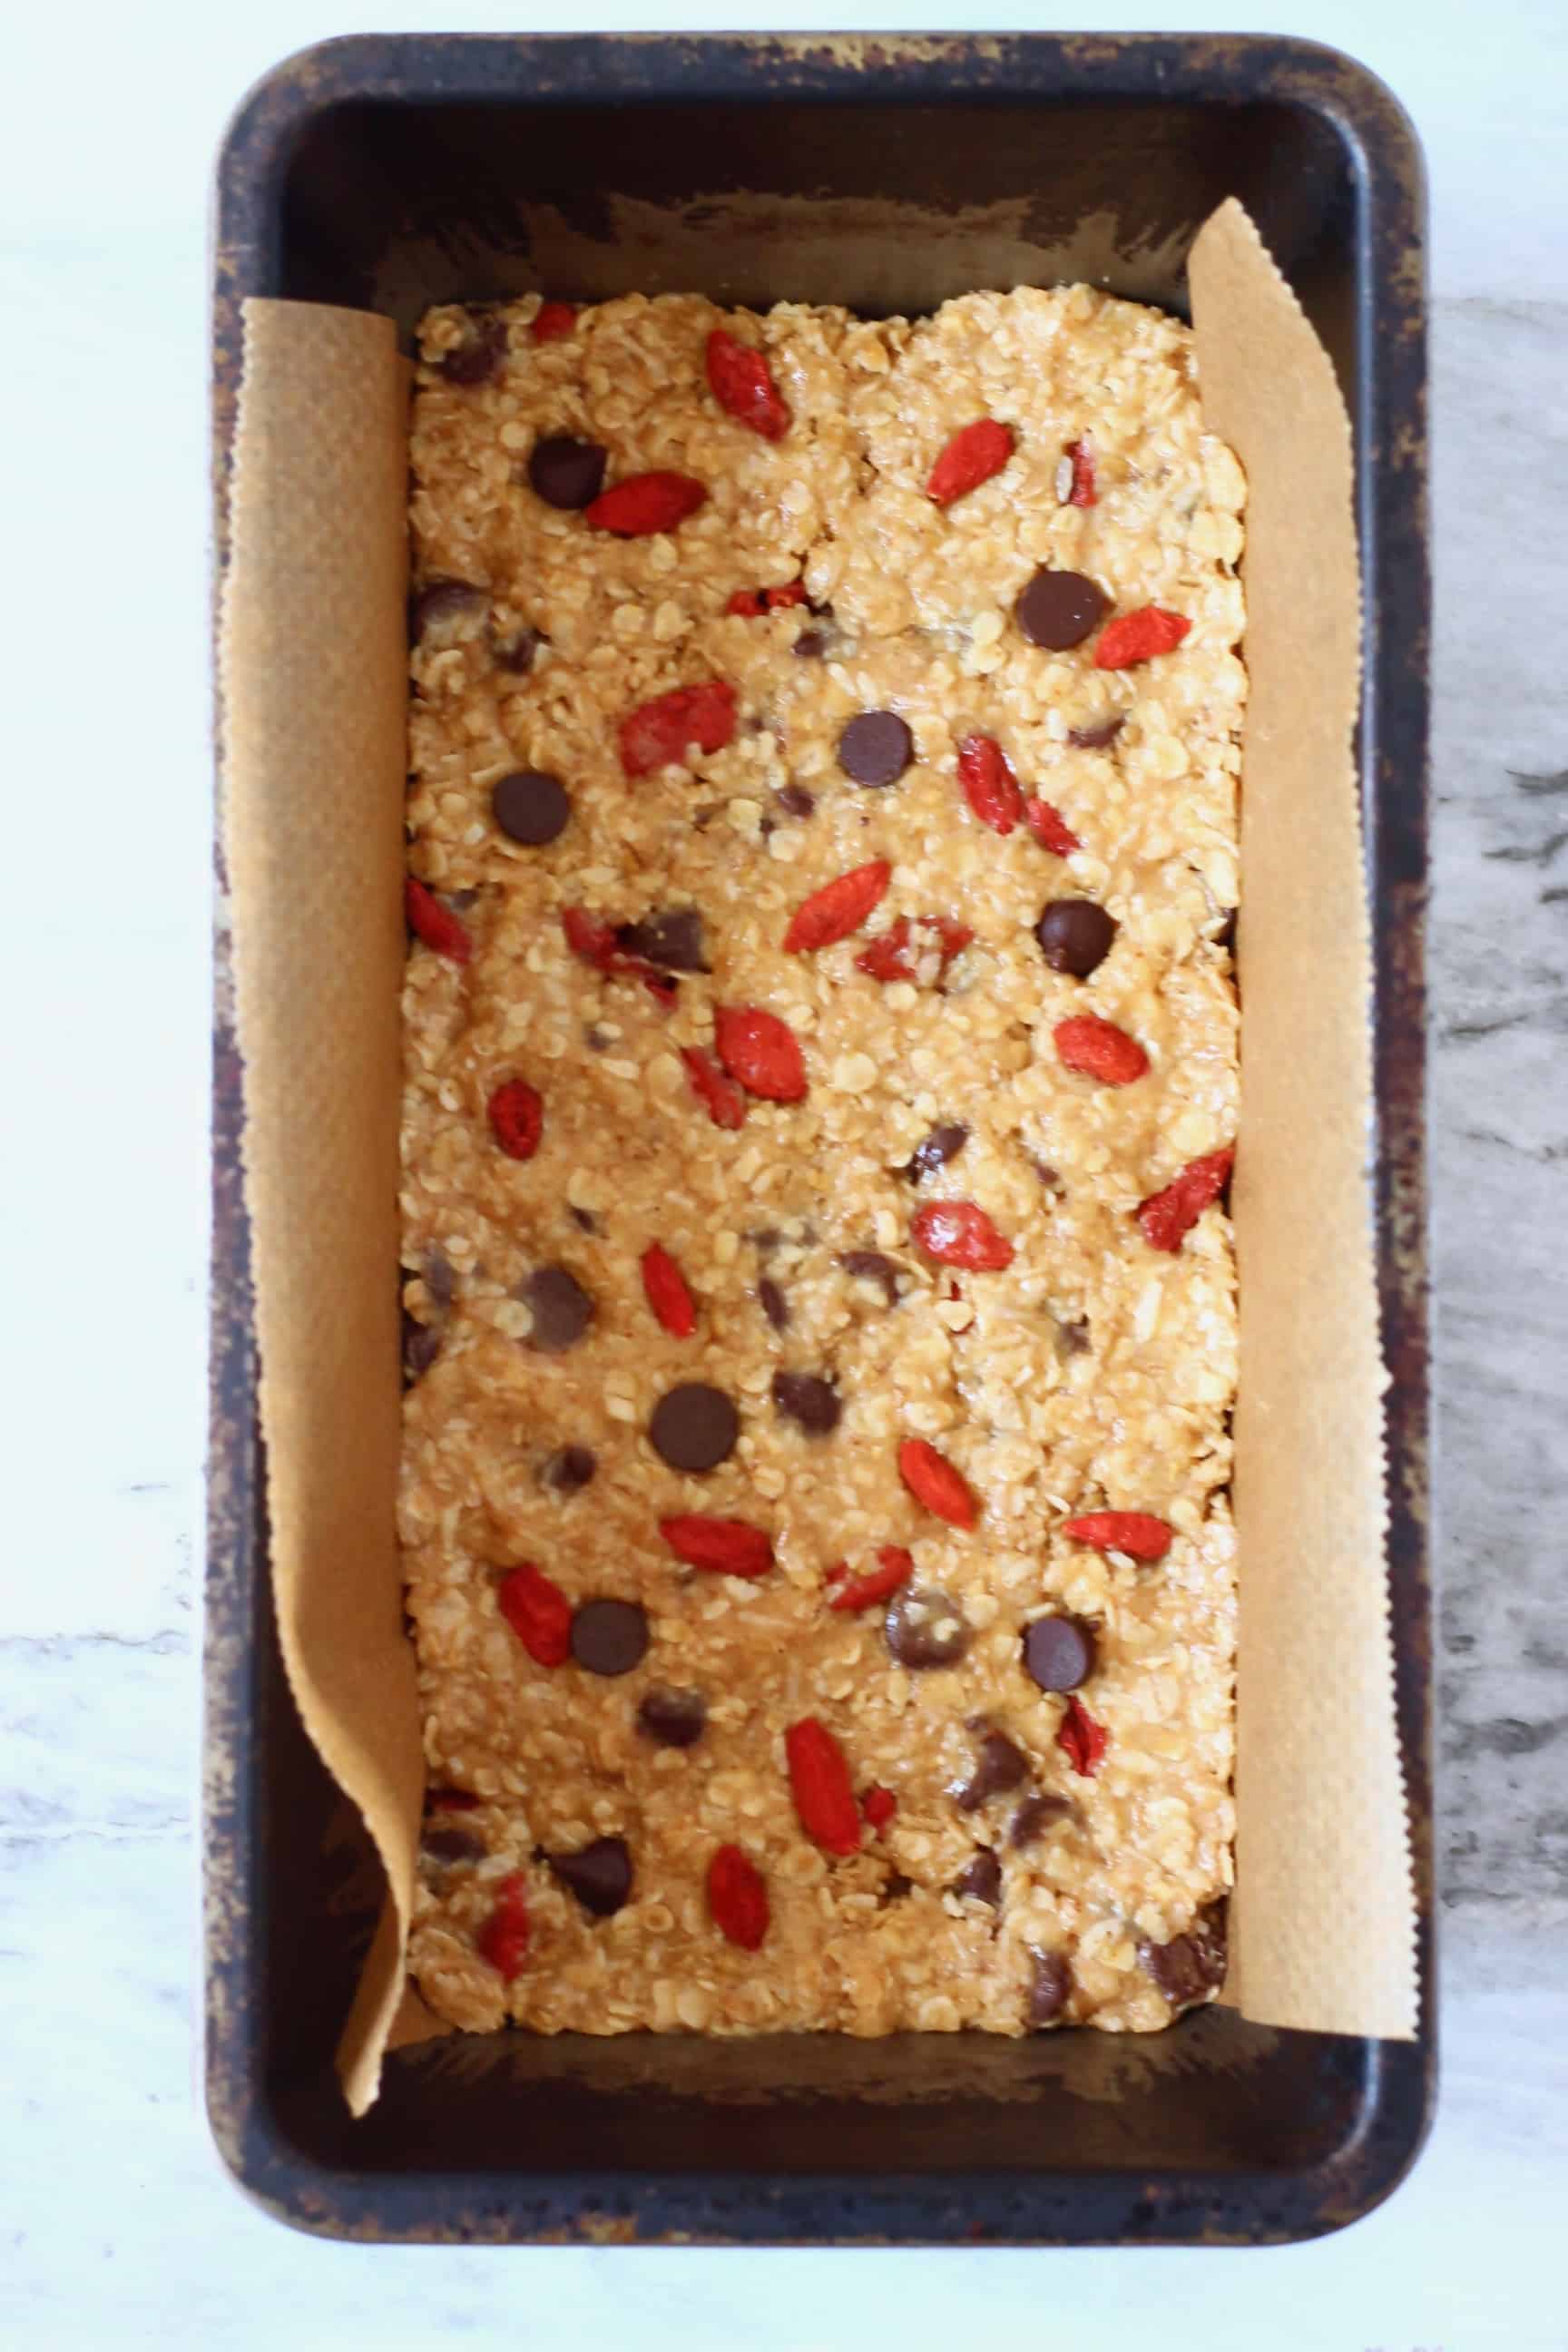 No-bake granola bar mixture with chocolate chips and goji berries in a loaf tin lined with baking paper